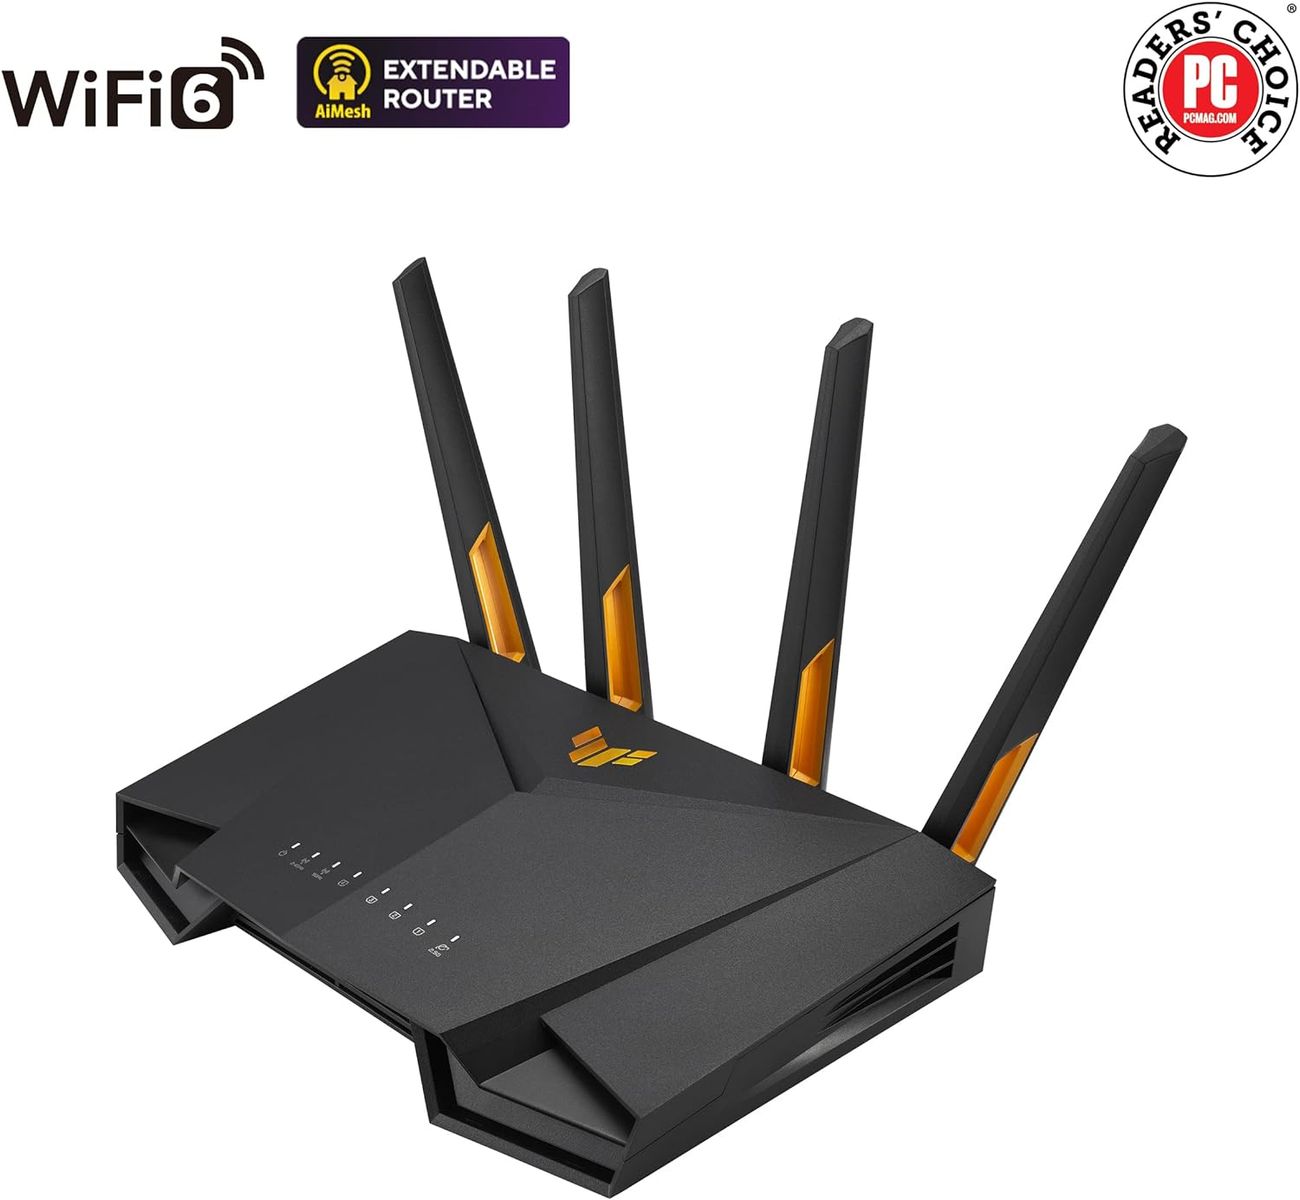 ASUS TUF Gaming AX4200 Dual Band WiFi 6 Gaming kombinierbarer Router (Tethering als 4G und 5G Router-Ersatz, WiFi 6, bis zu 4200 Mbit/s, Mobile Game Mode, 2,5Gbit/s Port, AiMesh, AiProtection Pro) TUF WiFi6 4.200 Mbit/s